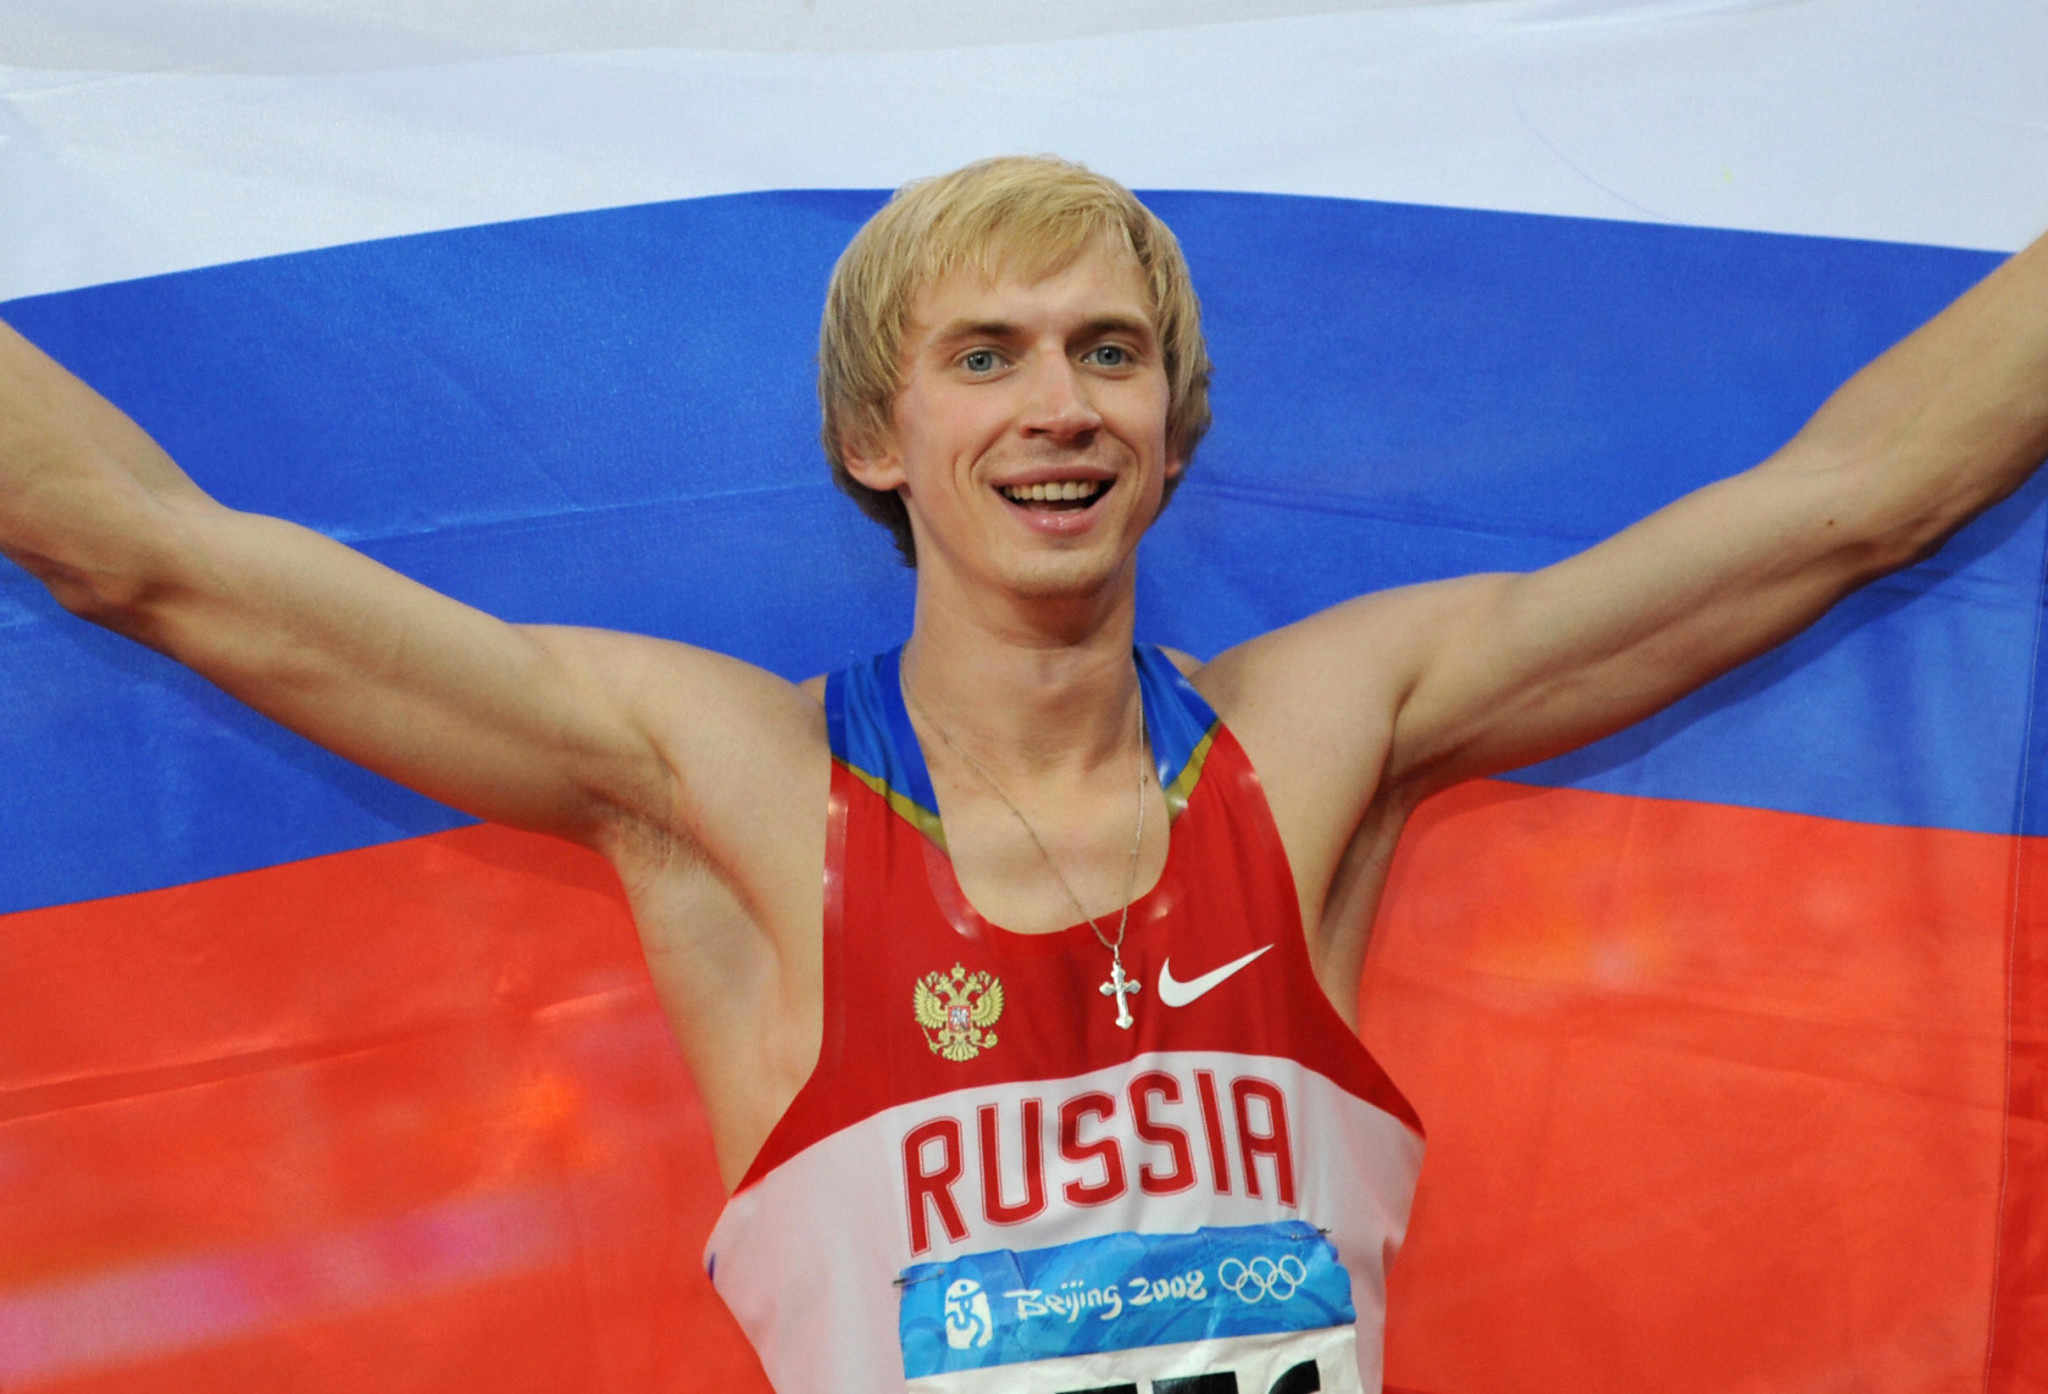 Andrei Silnov won the high jump gold medal at the Beijing 2008 Olympic Games ©Getty Images